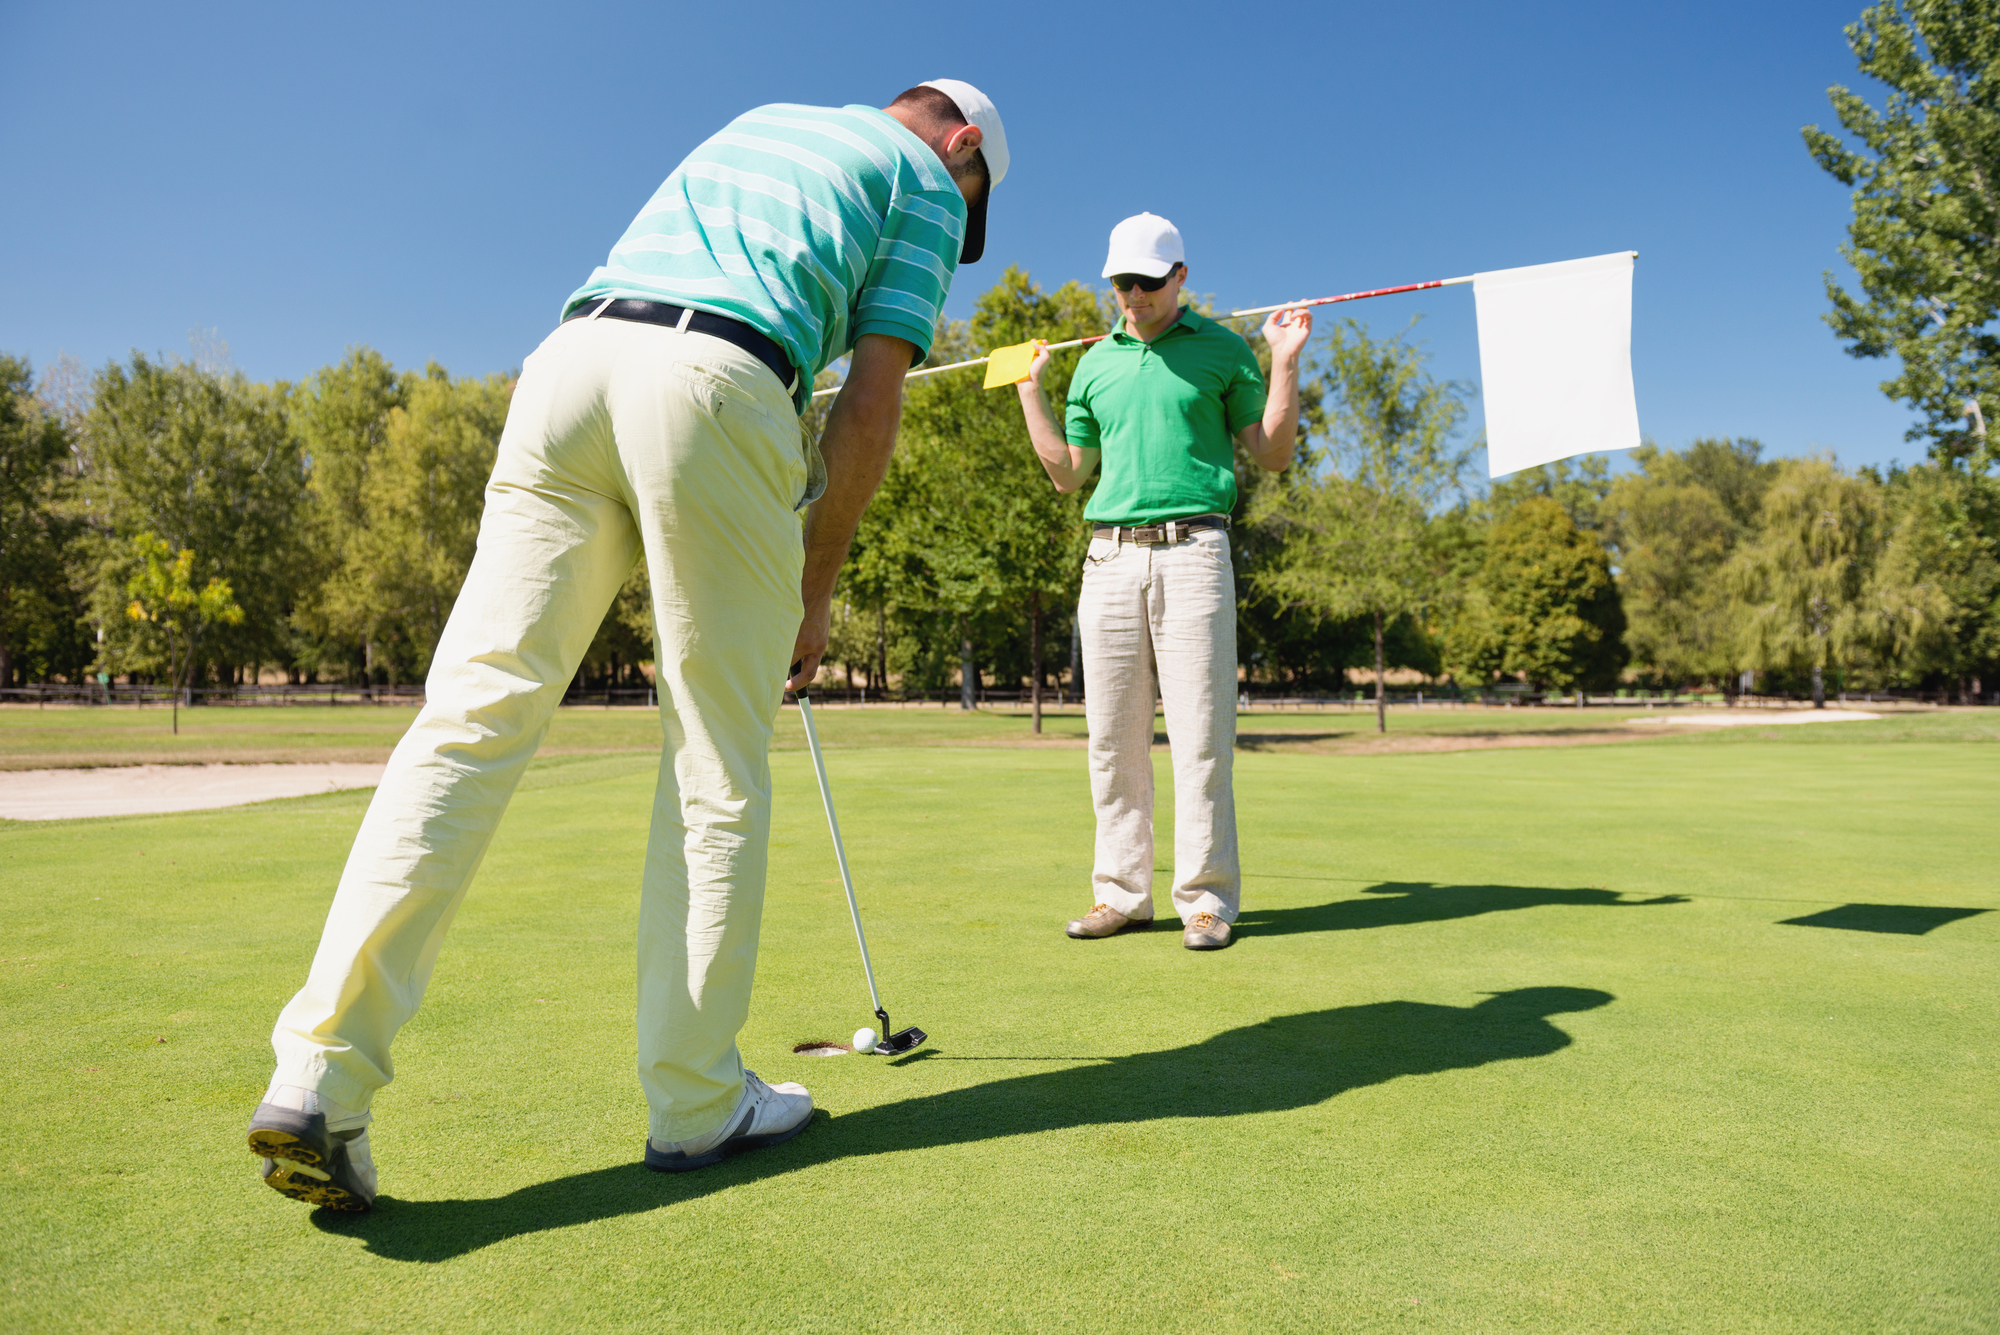 3 Ways That Other Sports Can Help You Play Better Golf